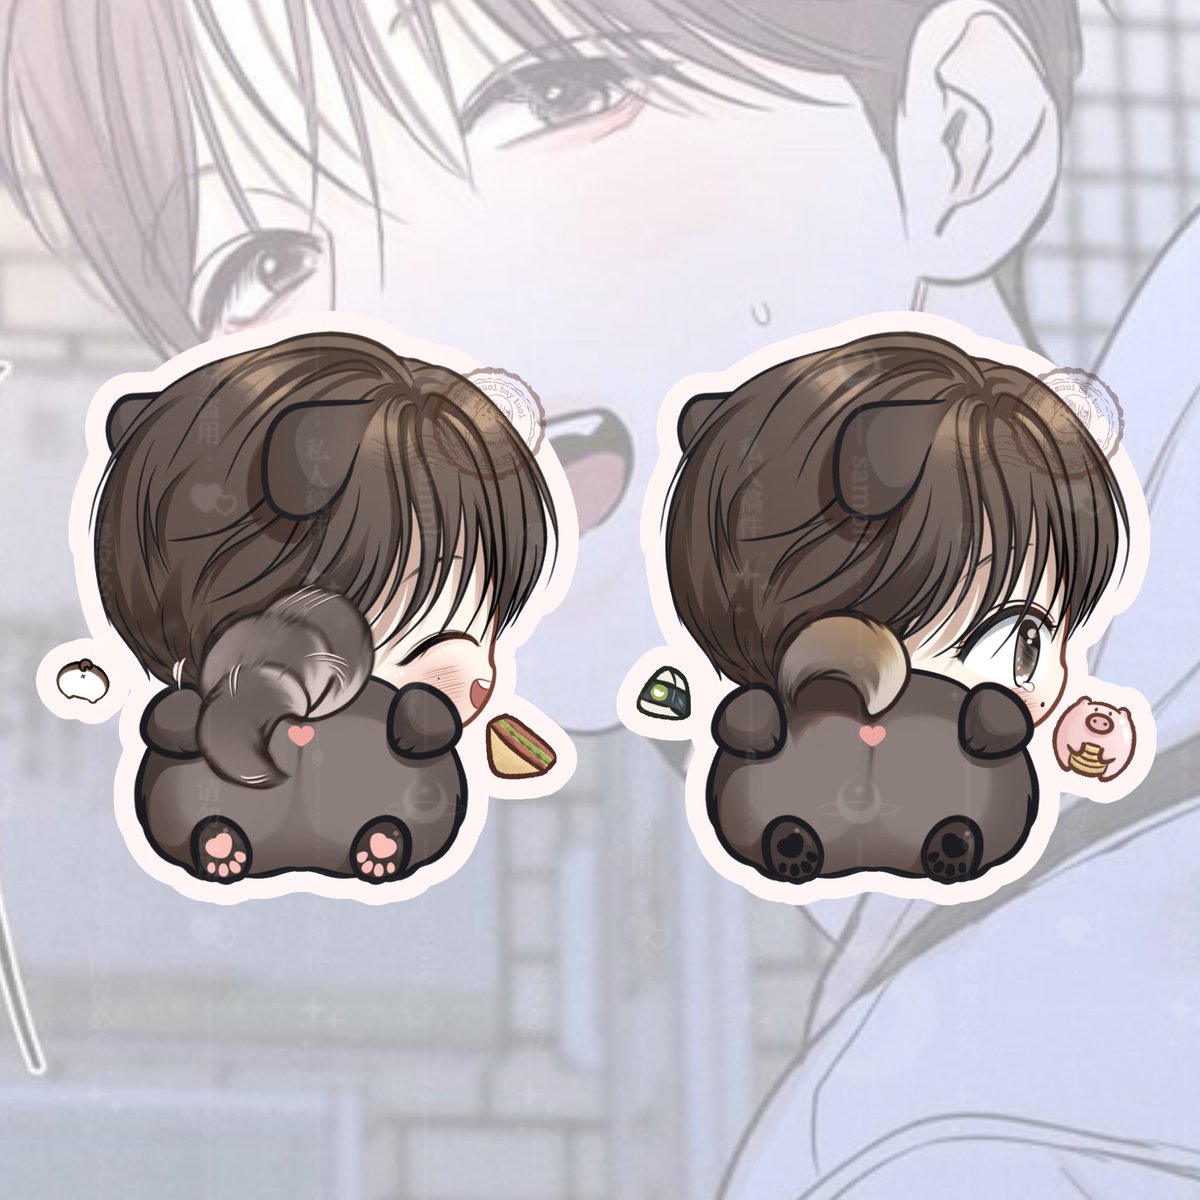 Hehe, this is puppy Yeo Min when he finally got a sandwich, and when his piggy bank has been stolen 😄😂😂 Original by @jalraeyo 🎨 @ciuthings #일간알바